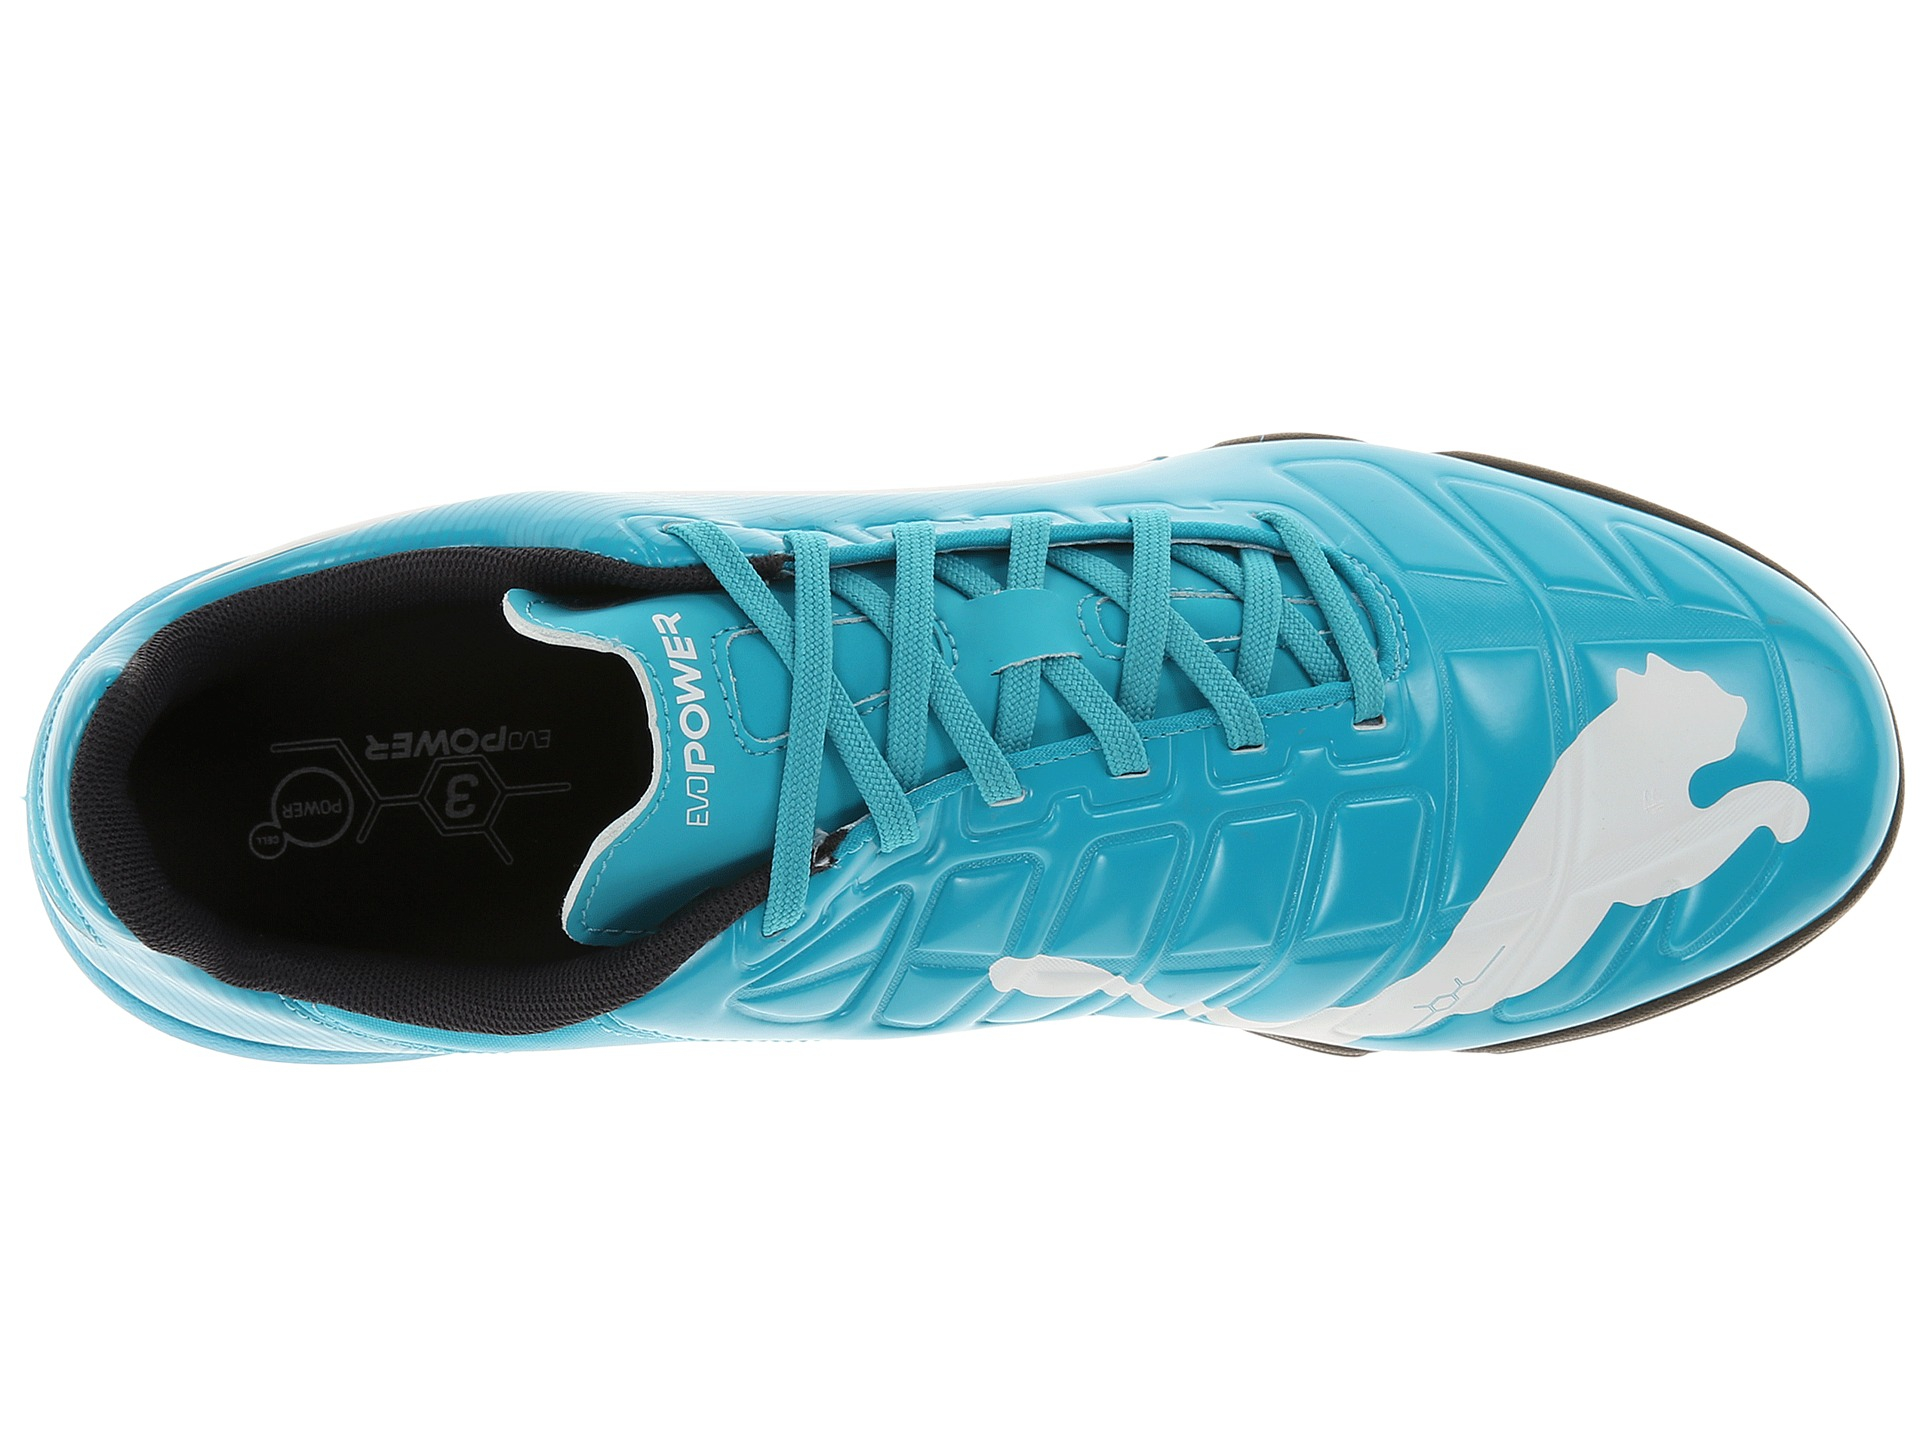 puma evopower 3 pink and blue> OFF-60%